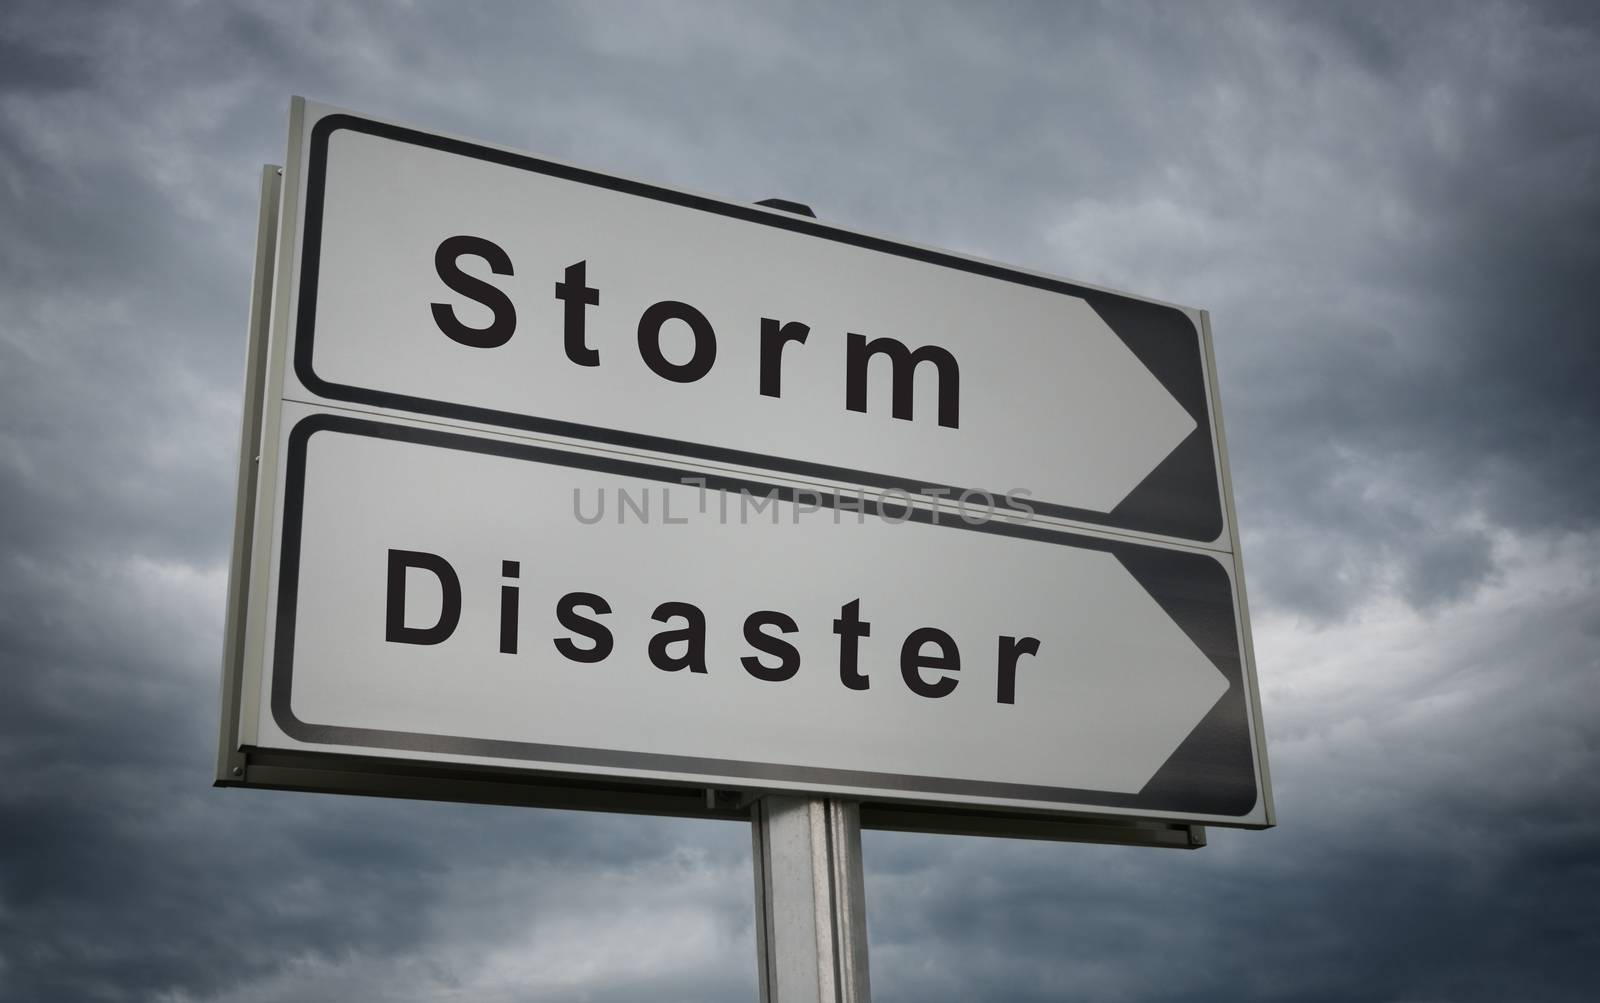 Storm Disaster road sign. by BPhoto